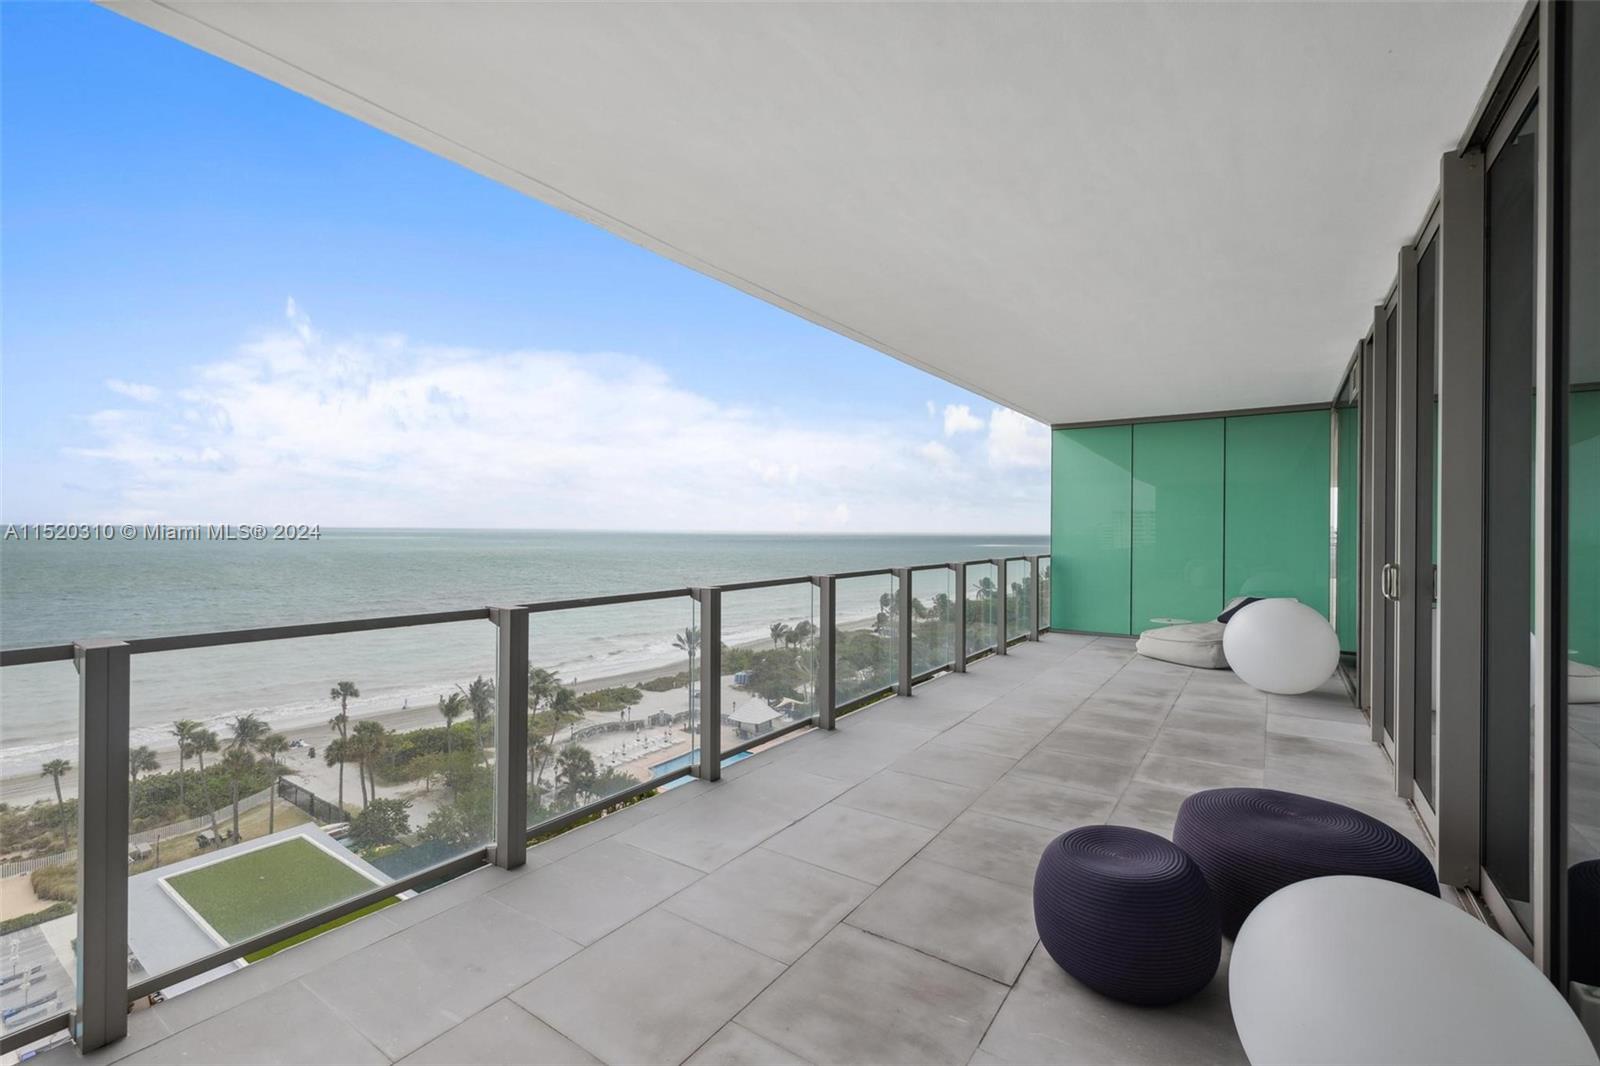 Property for Sale at 360 Ocean Dr 902S, Key Biscayne, Miami-Dade County, Florida - Bedrooms: 4 
Bathrooms: 6  - $8,350,000